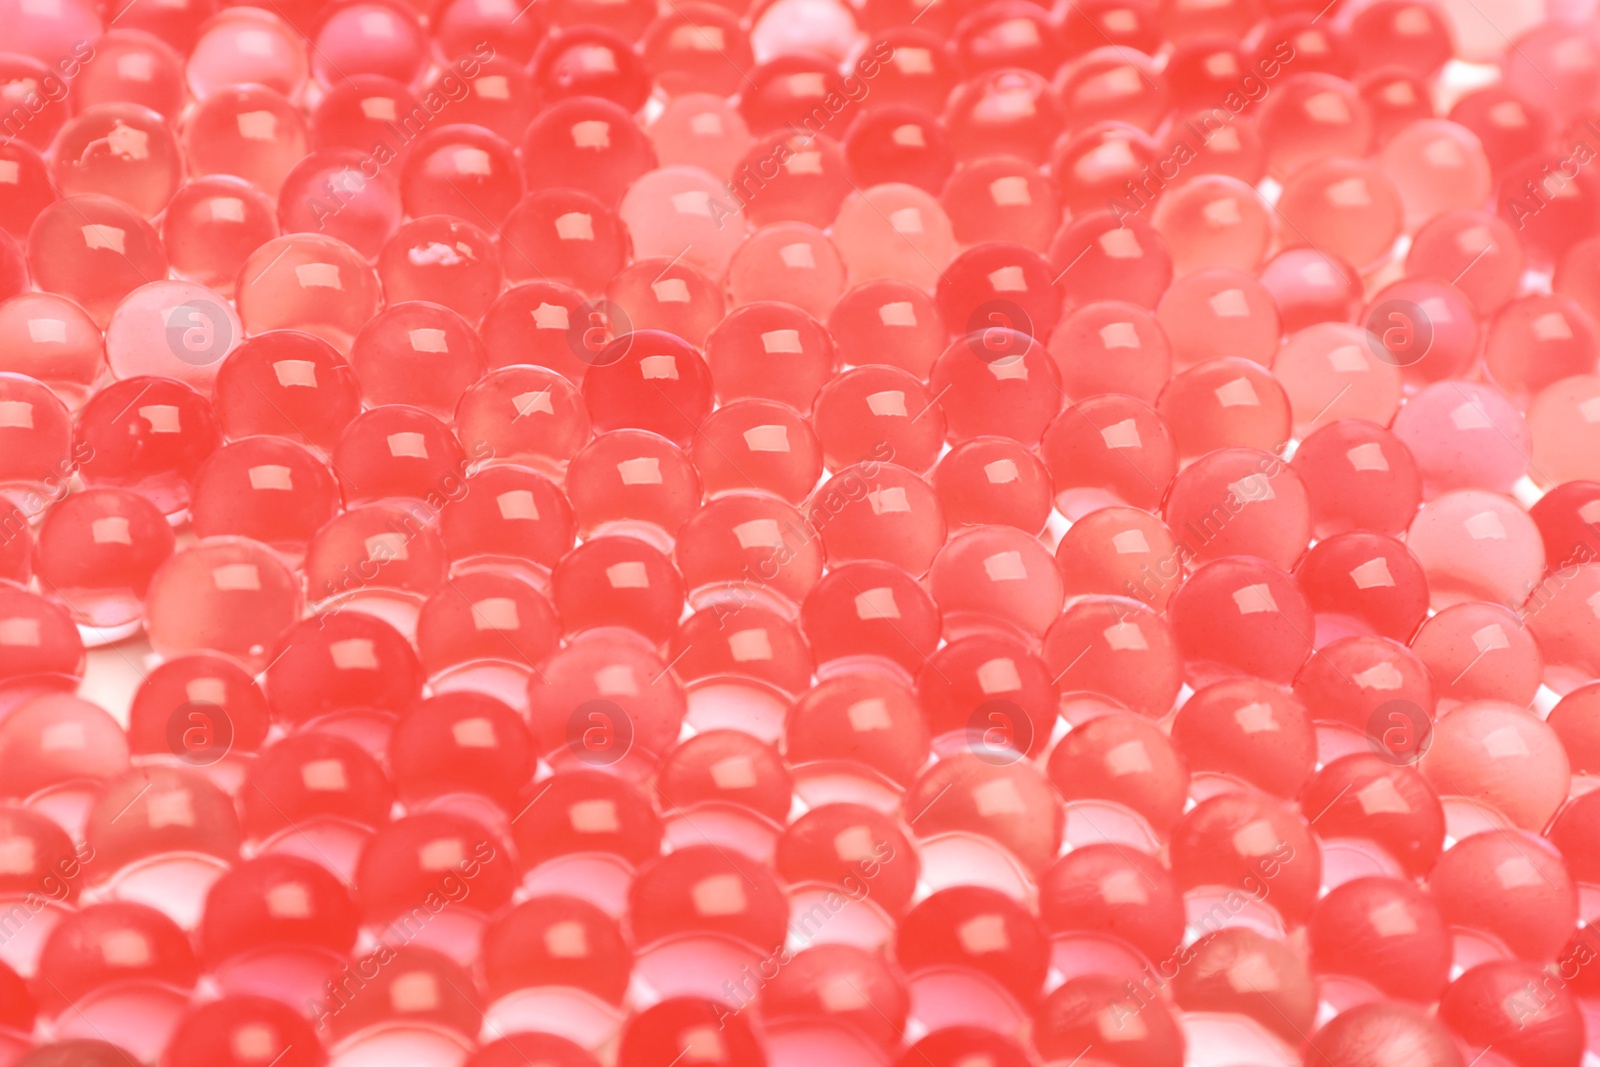 Photo of Closeup view of red vase filler as background. Water beads